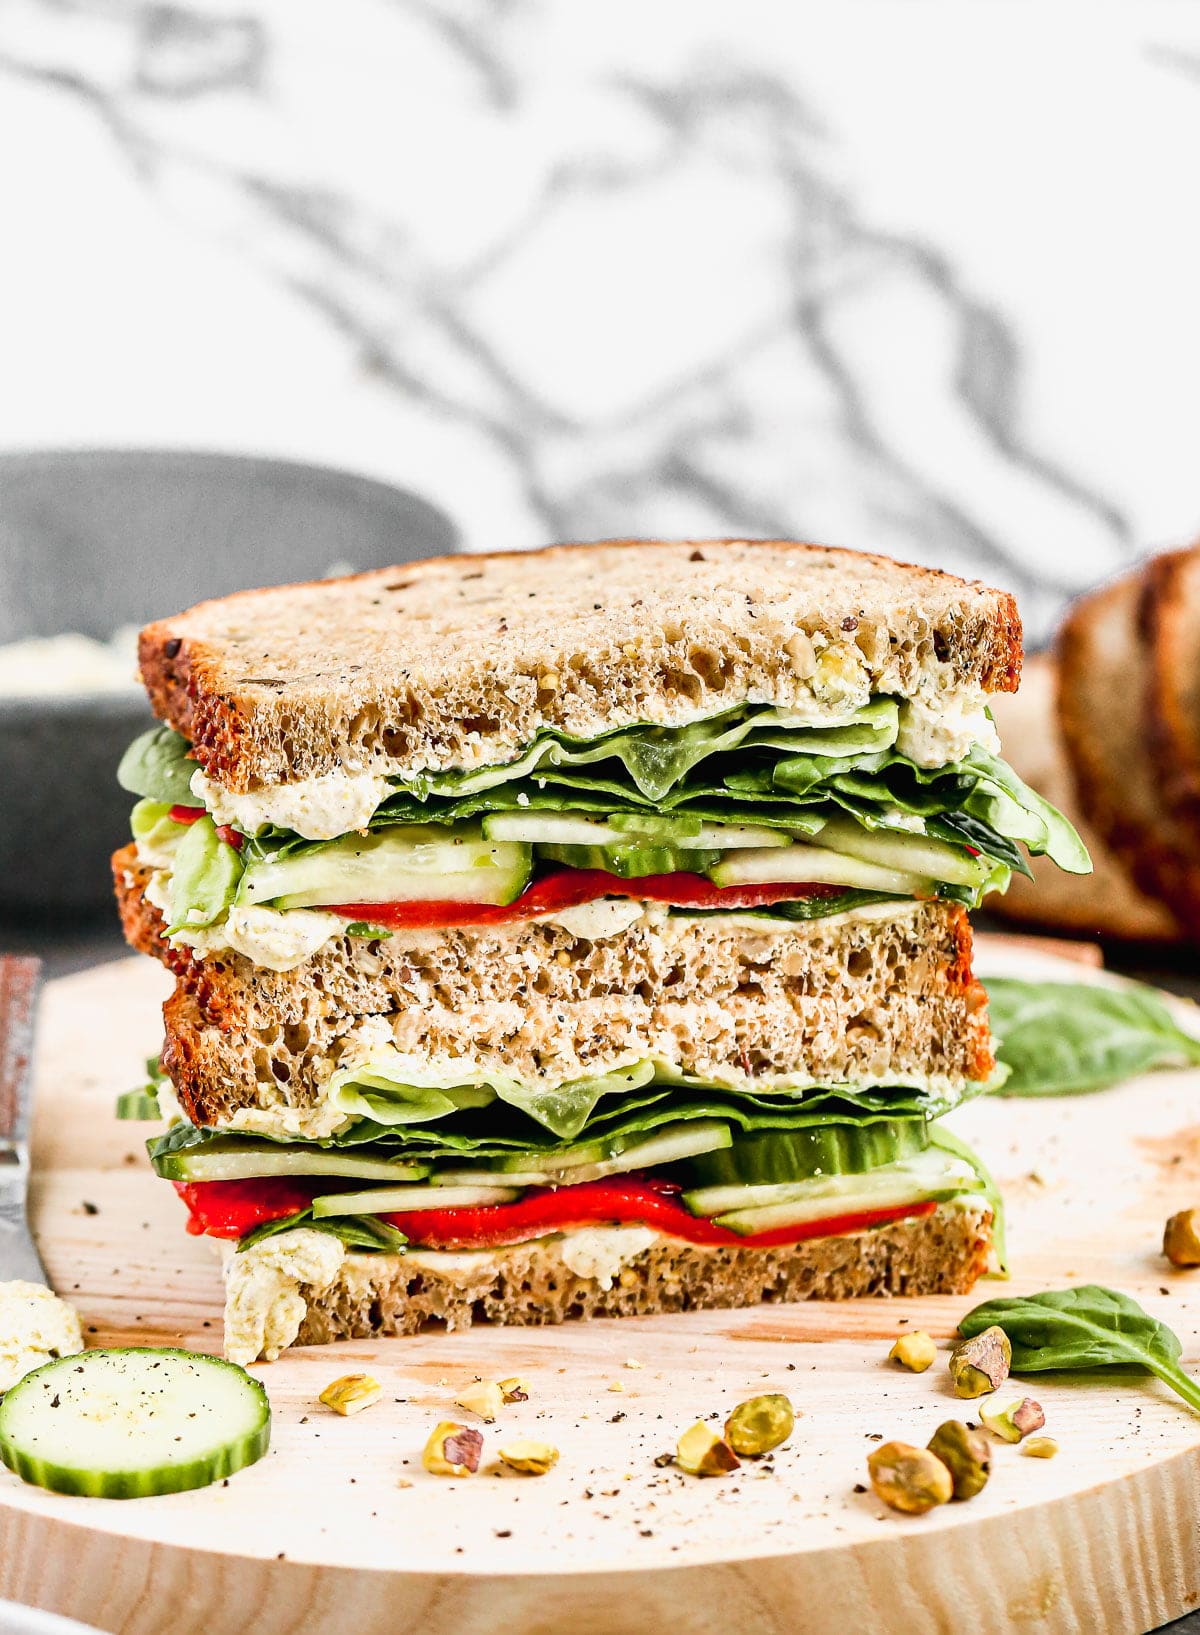 Our take on a classic Cucumber Sandwich includes layers of hearty spinach, vinaigrette-dressed butter lettuce, smoky roasted red peppers, and the pièce de résistance, a pistachio-infused goat cheese that will make you weak in the knees. The perfect lunch to prep early and enjoy all week long. 